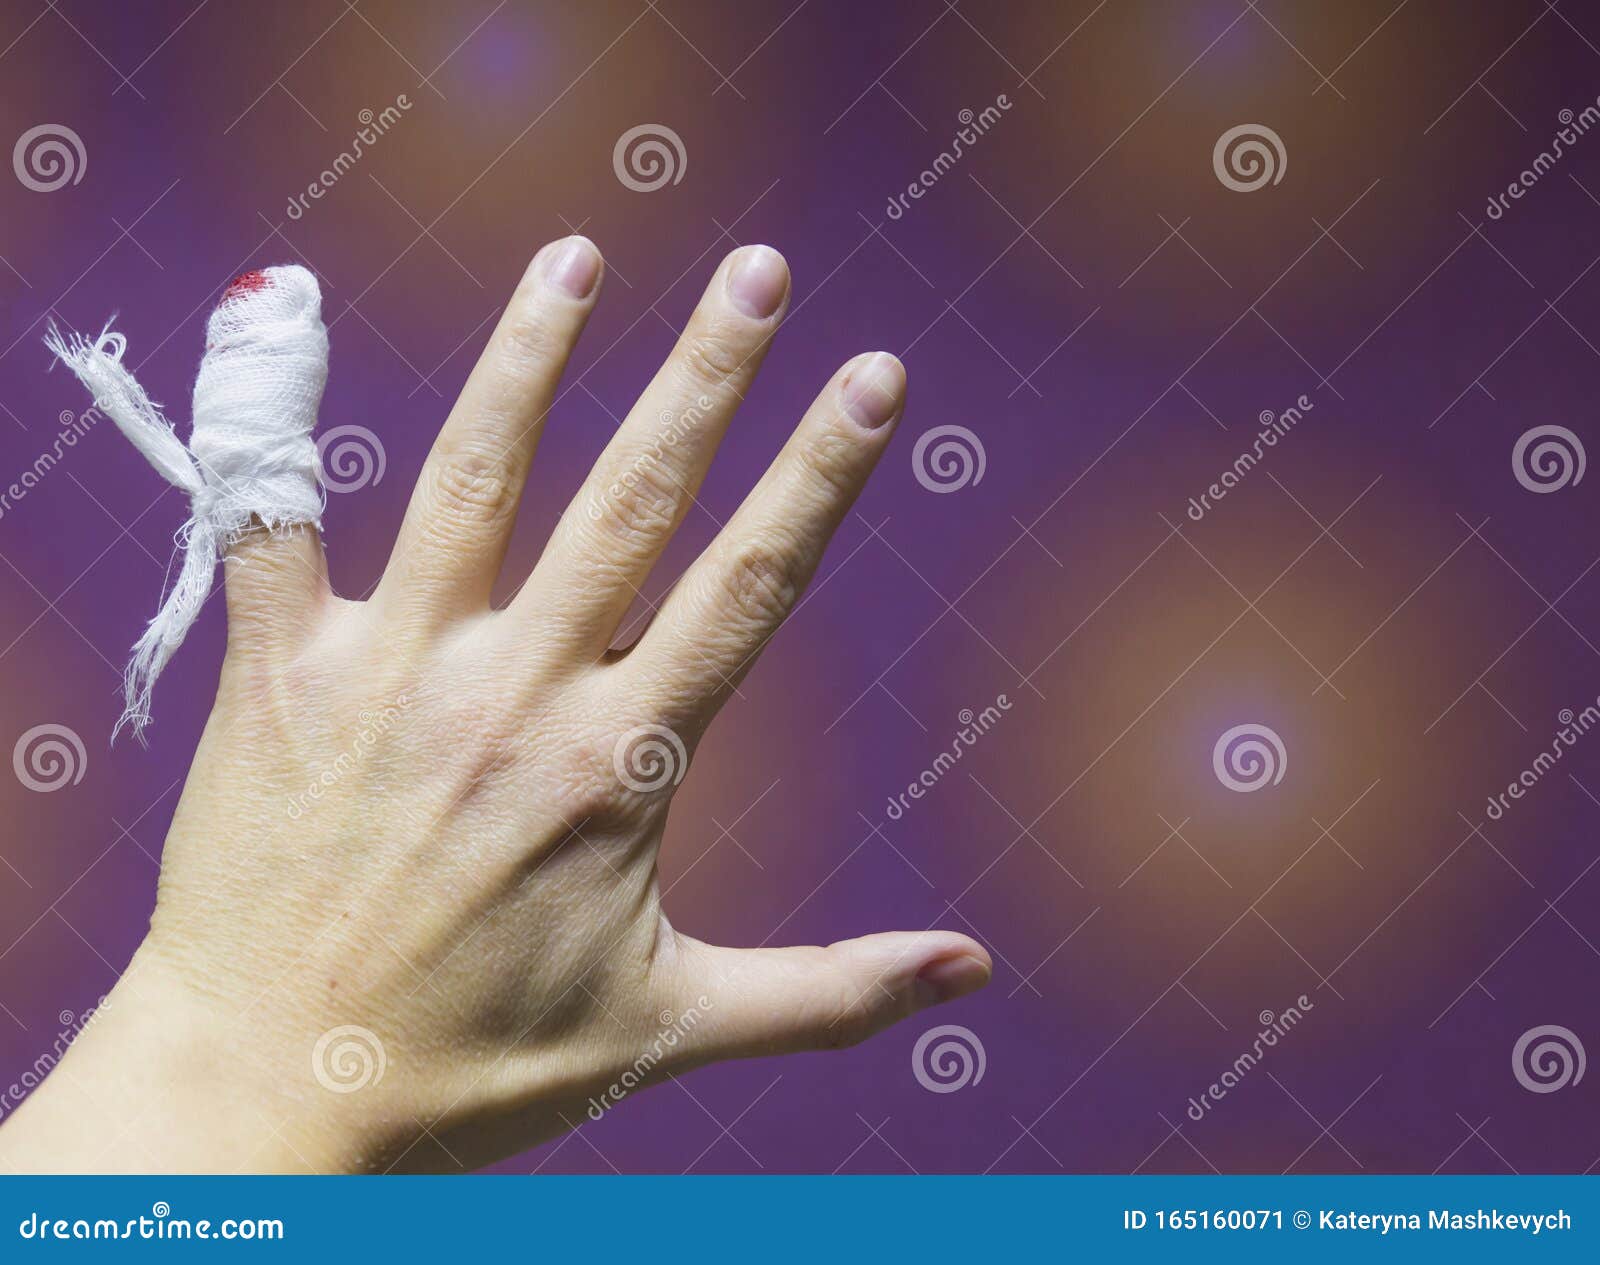 Bandaged hand featuring accident, aid, and arm | Health & Medical Stock Photos ~ Creative Market